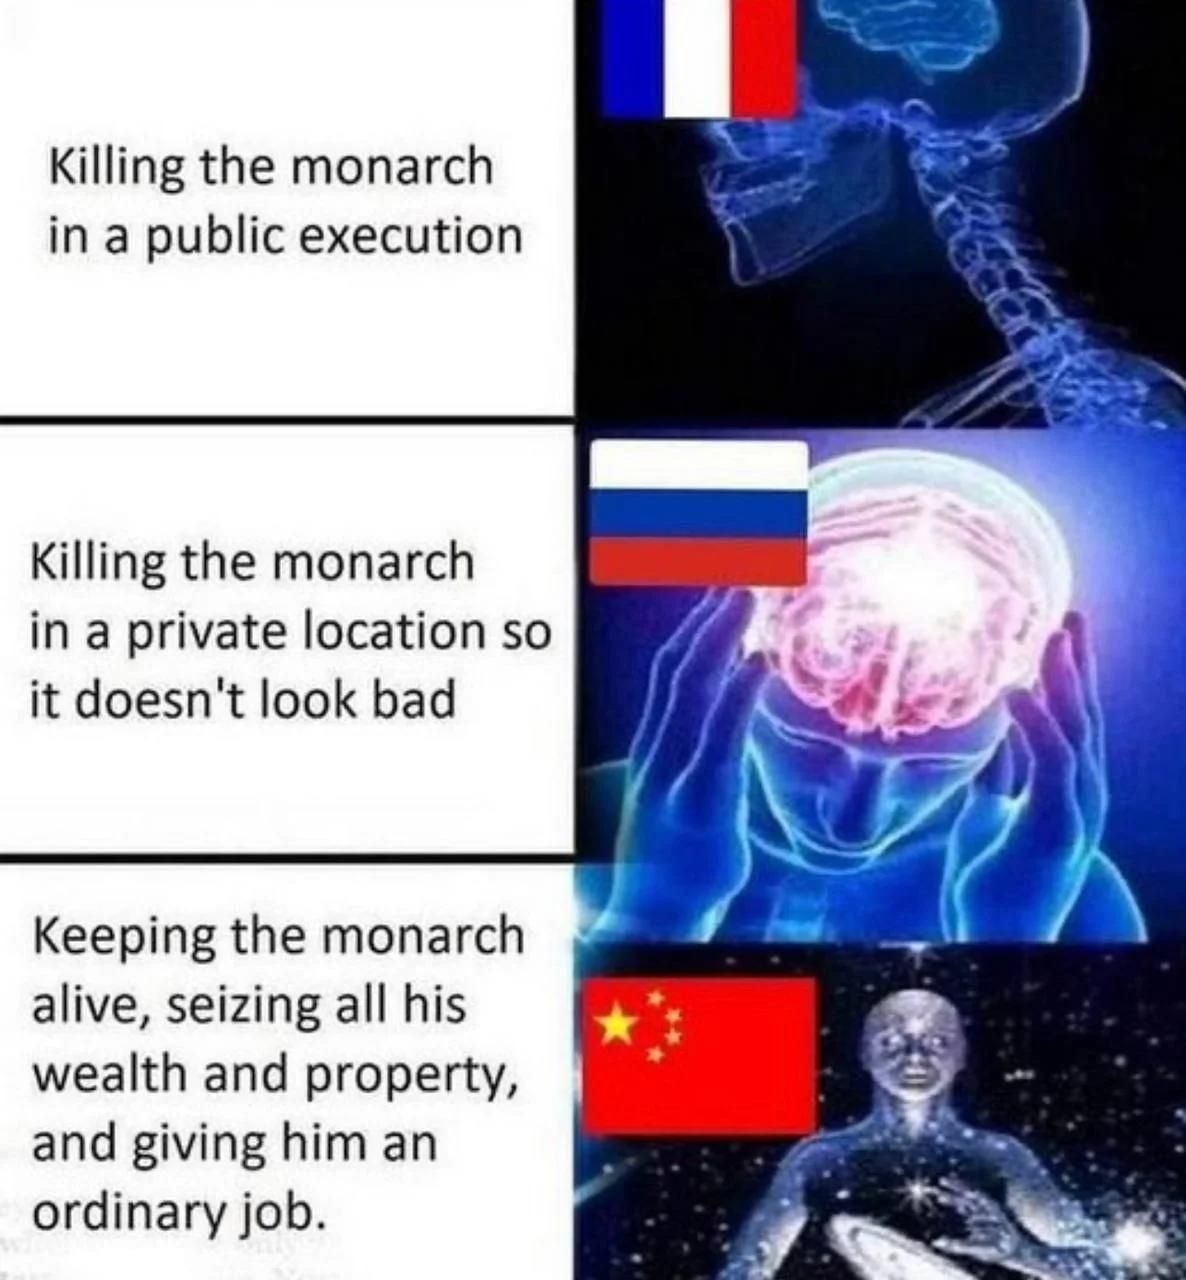 Chinese properly treating their monarchs